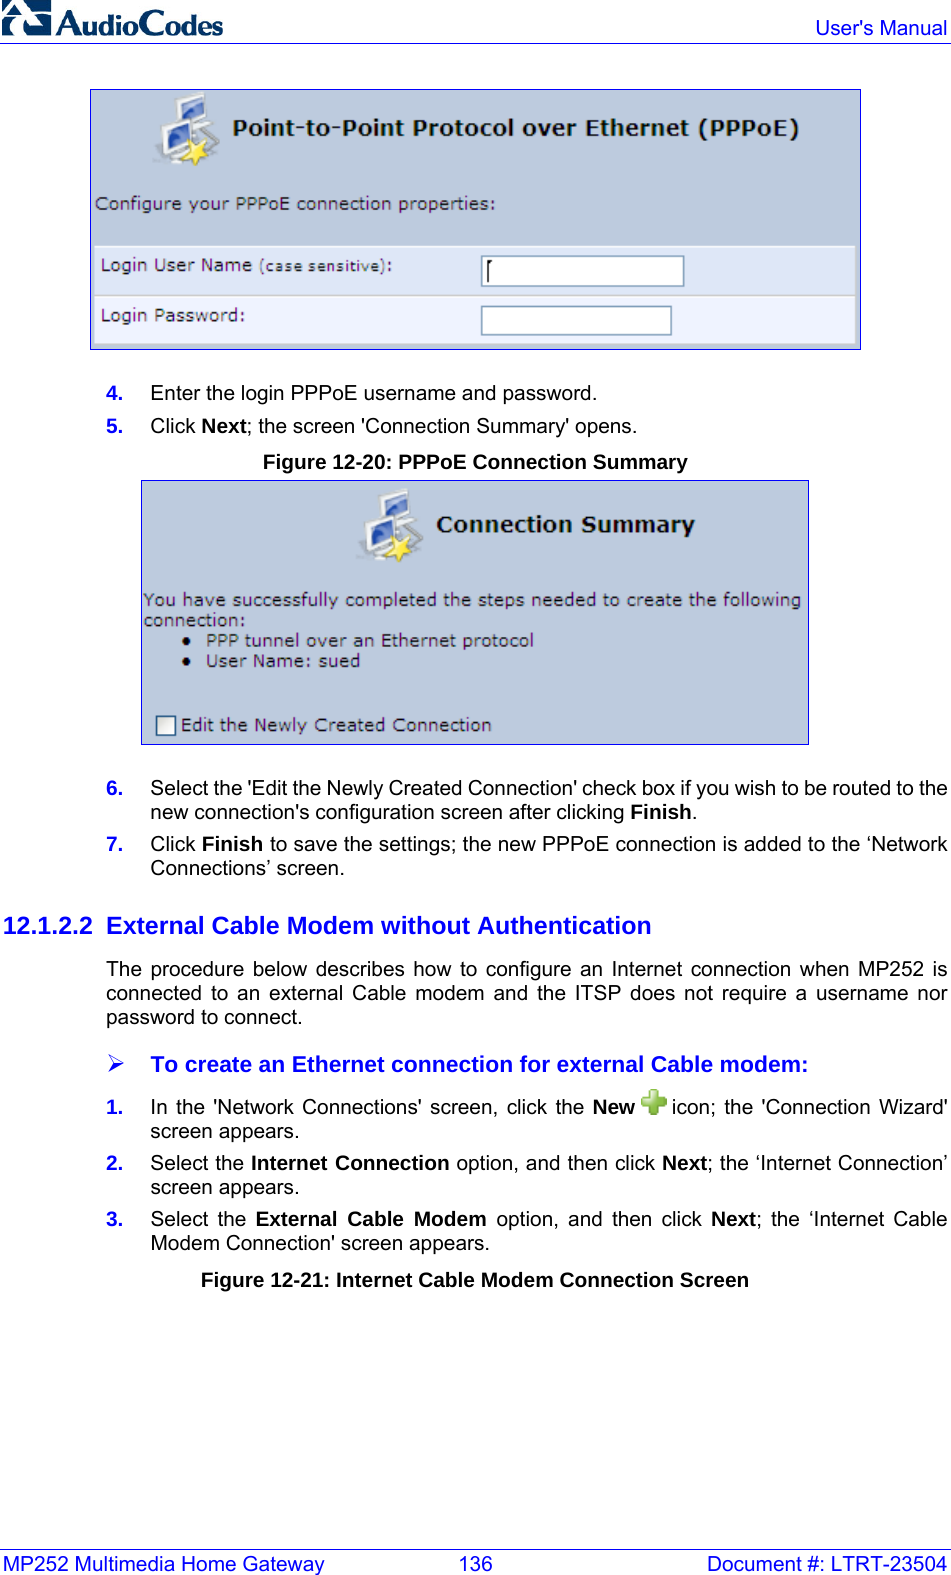 MP252 Multimedia Home Gateway  136  Document #: LTRT-23504  User&apos;s Manual   4.  Enter the login PPPoE username and password. 5.  Click Next; the screen &apos;Connection Summary&apos; opens. Figure 12-20: PPPoE Connection Summary  6.  Select the &apos;Edit the Newly Created Connection&apos; check box if you wish to be routed to the new connection&apos;s configuration screen after clicking Finish. 7.  Click Finish to save the settings; the new PPPoE connection is added to the ‘Network Connections’ screen. 12.1.2.2  External Cable Modem without Authentication The procedure below describes how to configure an Internet connection when MP252 is connected to an external Cable modem and the ITSP does not require a username nor password to connect. ¾ To create an Ethernet connection for external Cable modem: 1.  In the &apos;Network Connections&apos; screen, click the New   icon; the &apos;Connection Wizard&apos; screen appears. 2.  Select the Internet Connection option, and then click Next; the ‘Internet Connection’ screen appears. 3.  Select the External Cable Modem option, and then click Next; the ‘Internet Cable Modem Connection&apos; screen appears. Figure 12-21: Internet Cable Modem Connection Screen 